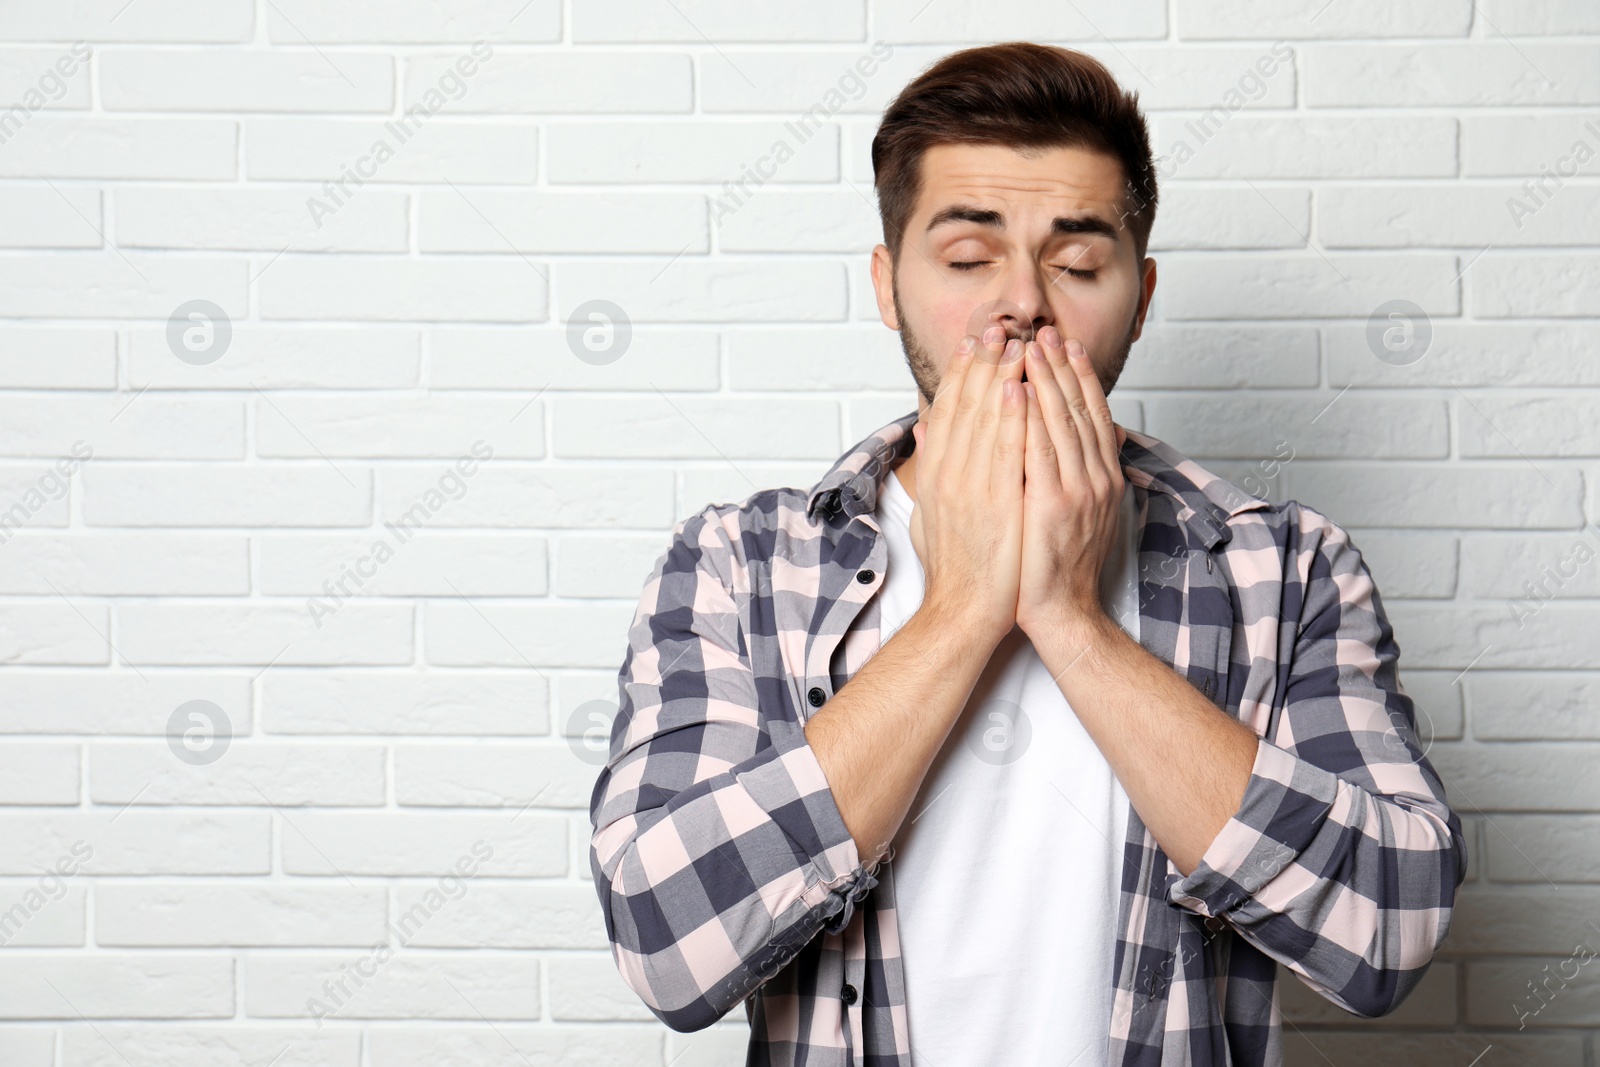 Photo of Handsome young man coughing near brick wall. Space for text